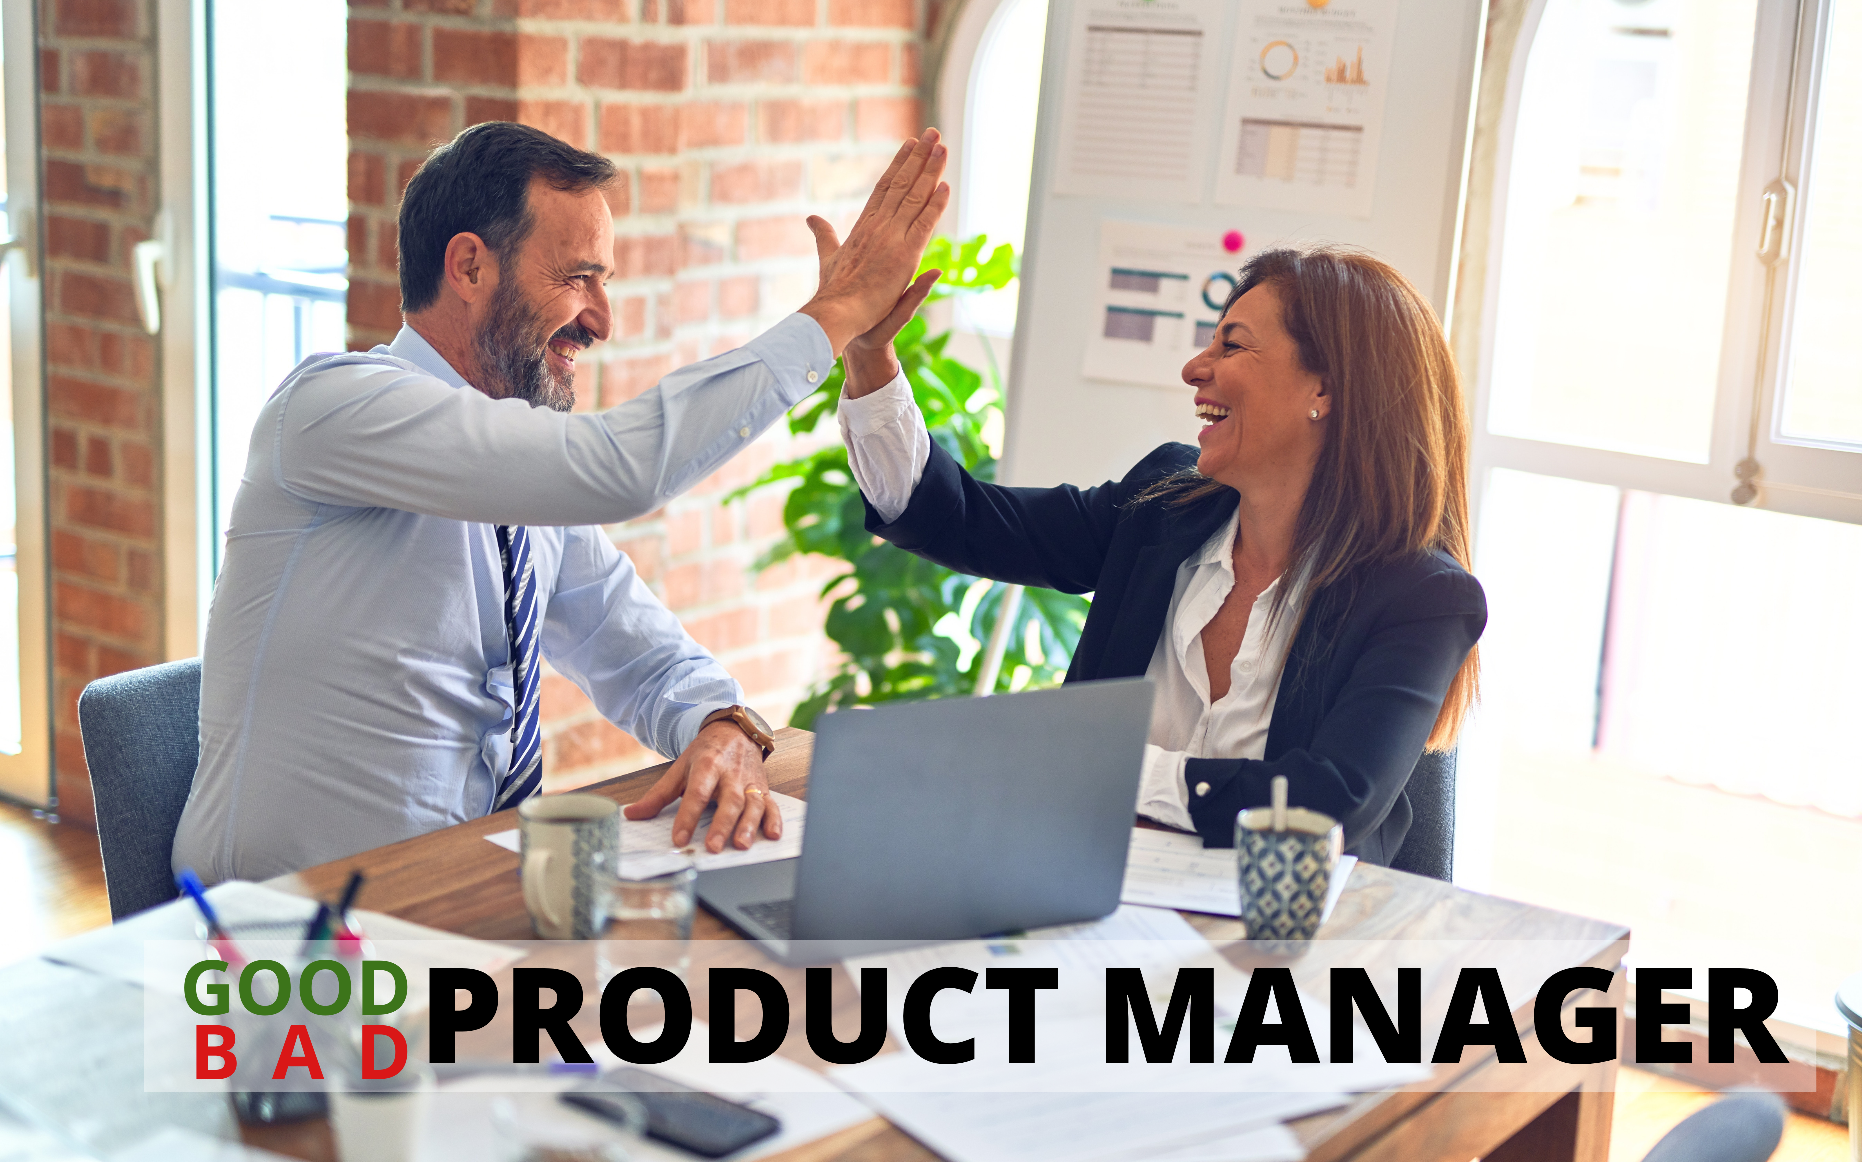 good product manager bad product manager, signs of a bad product manager, product manager strengths and weaknesses, good product manager bad product manager ben horowitz, good product manager bad product manager book